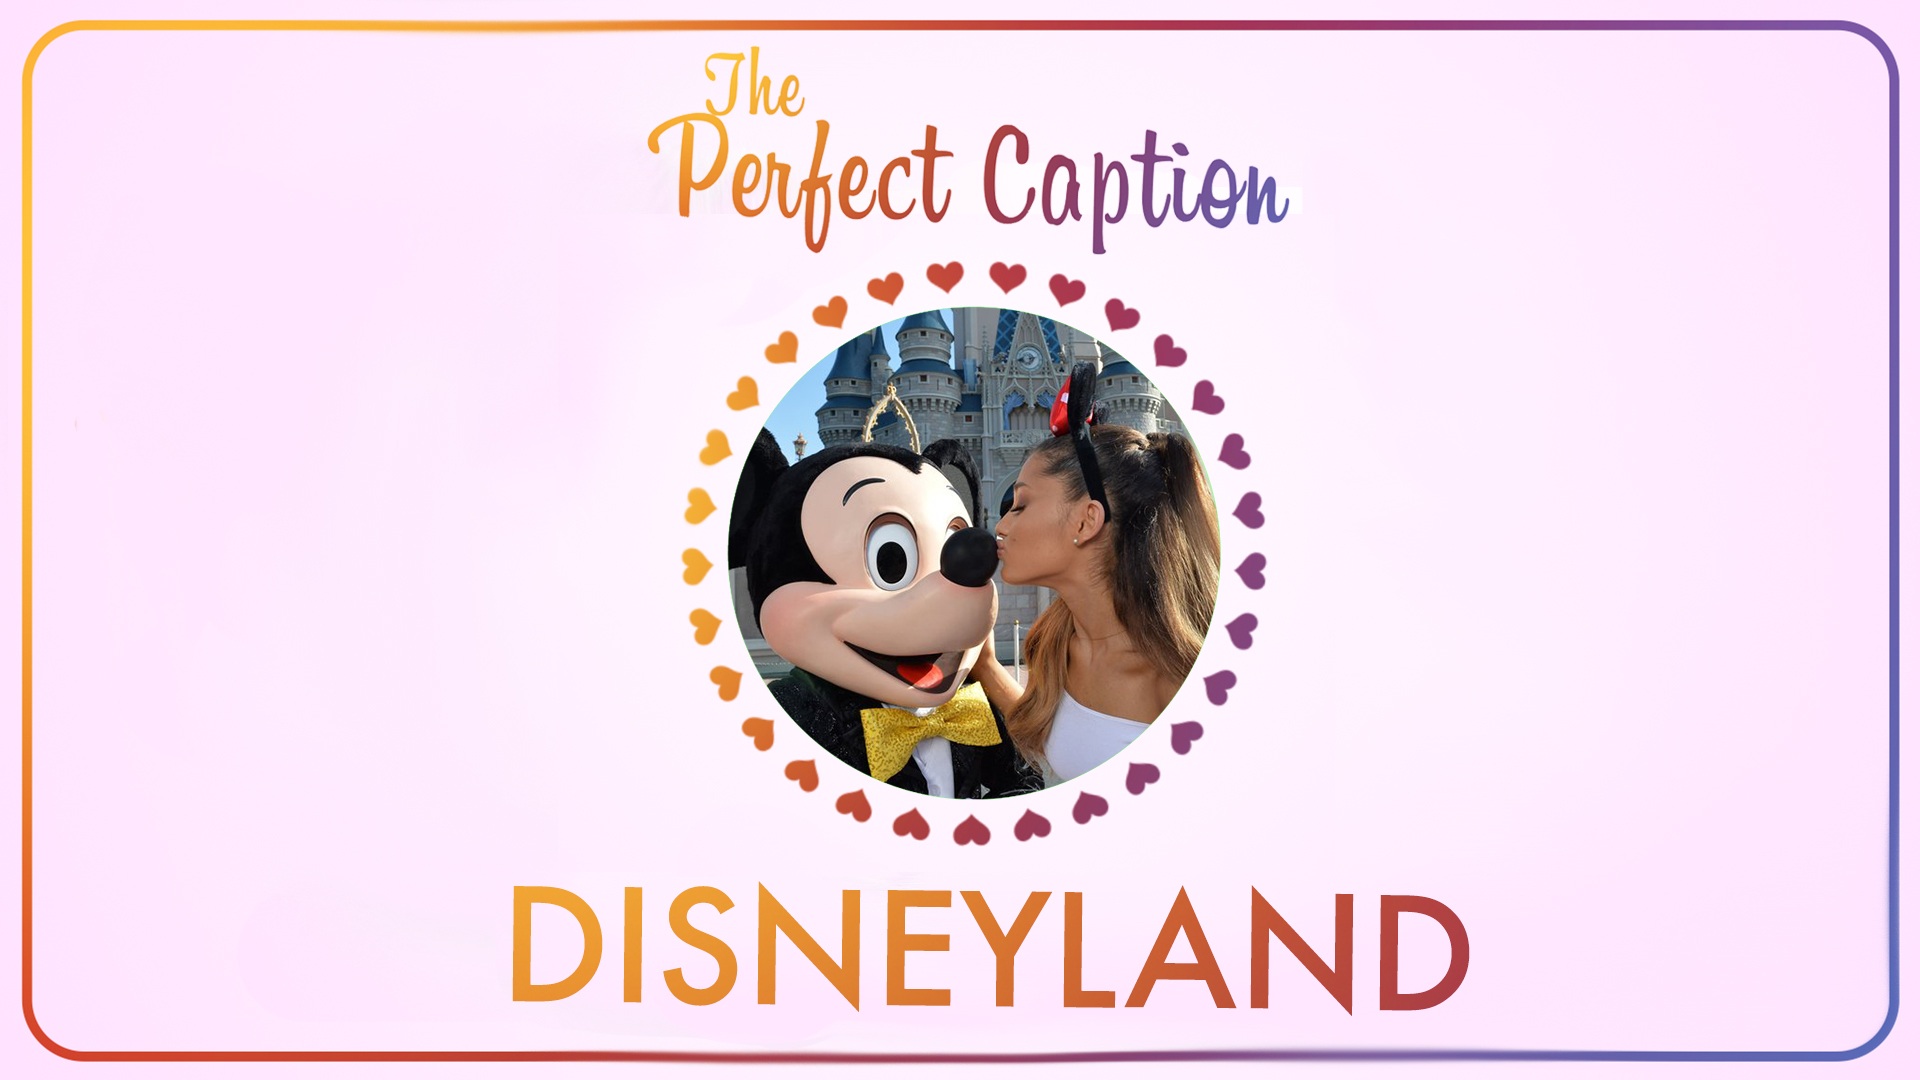 The Perfect Instagram Captions for Your Disneyland Posts